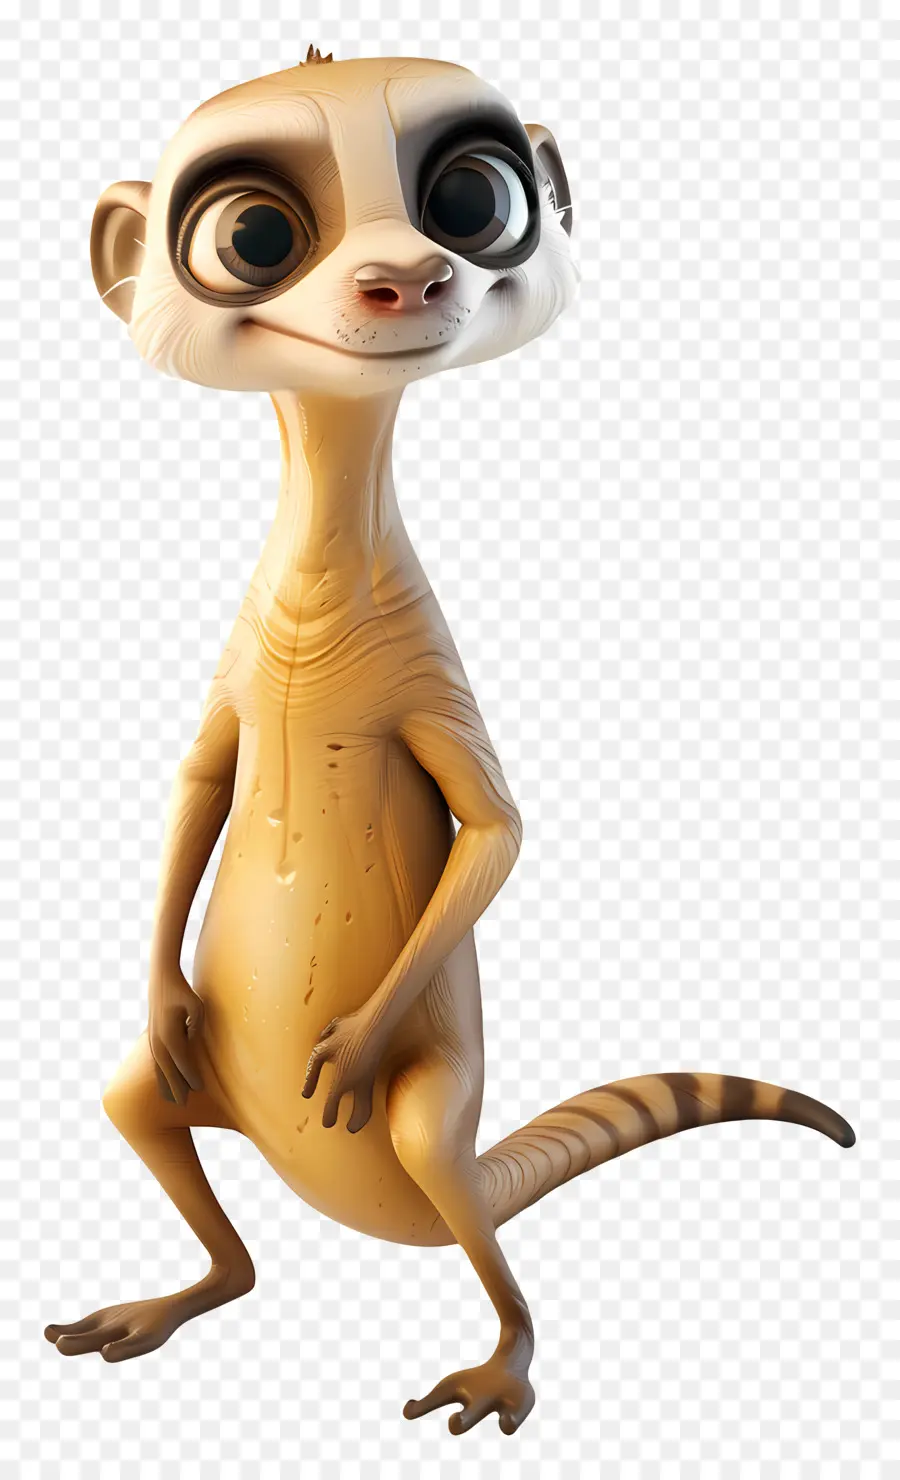 timon meerkat standing hind legs front paws